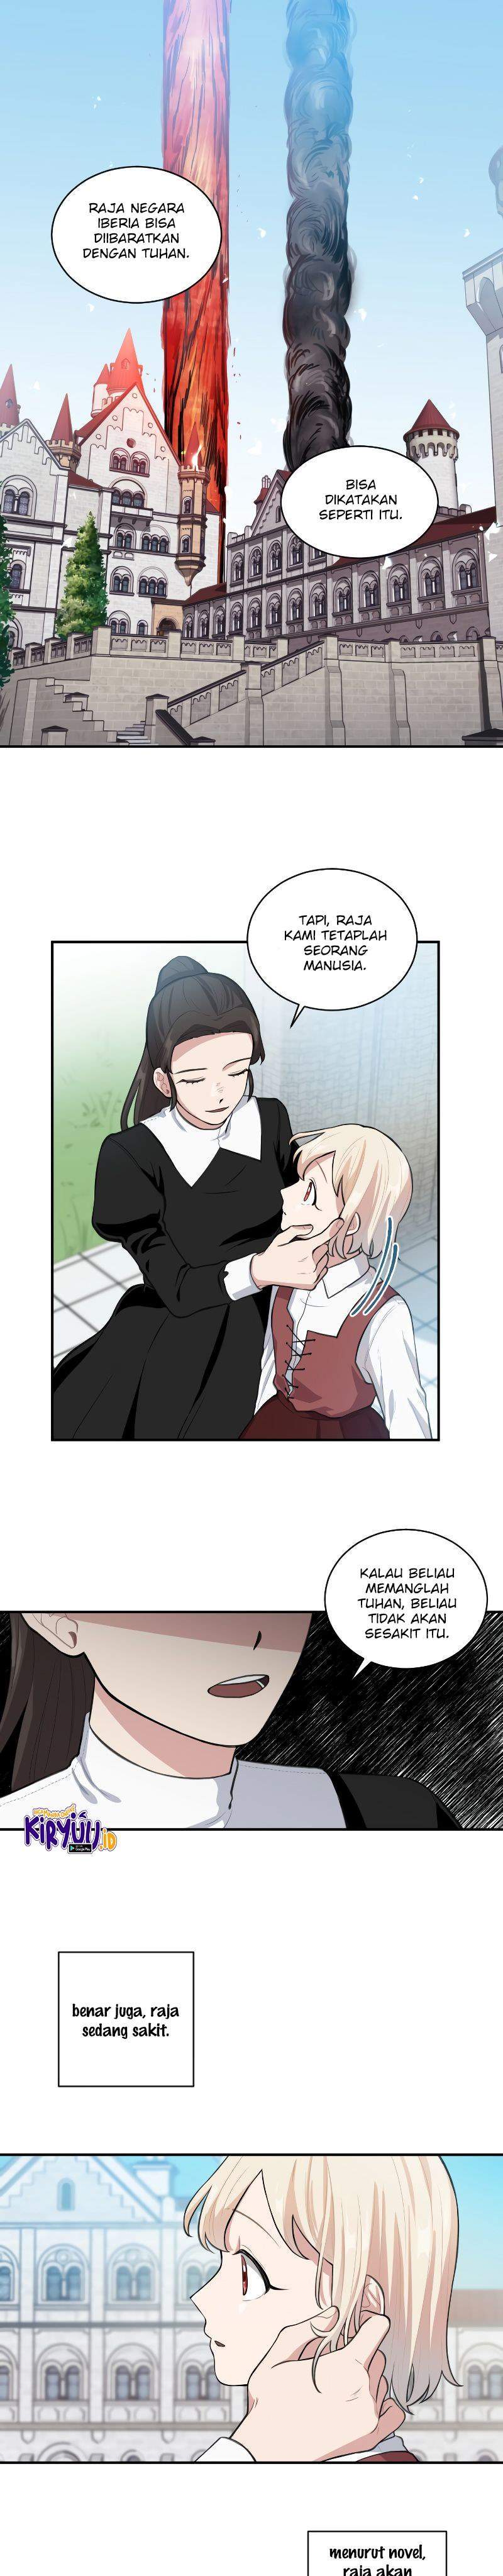 I Became a Maid in a TL Novel Chapter 3 2